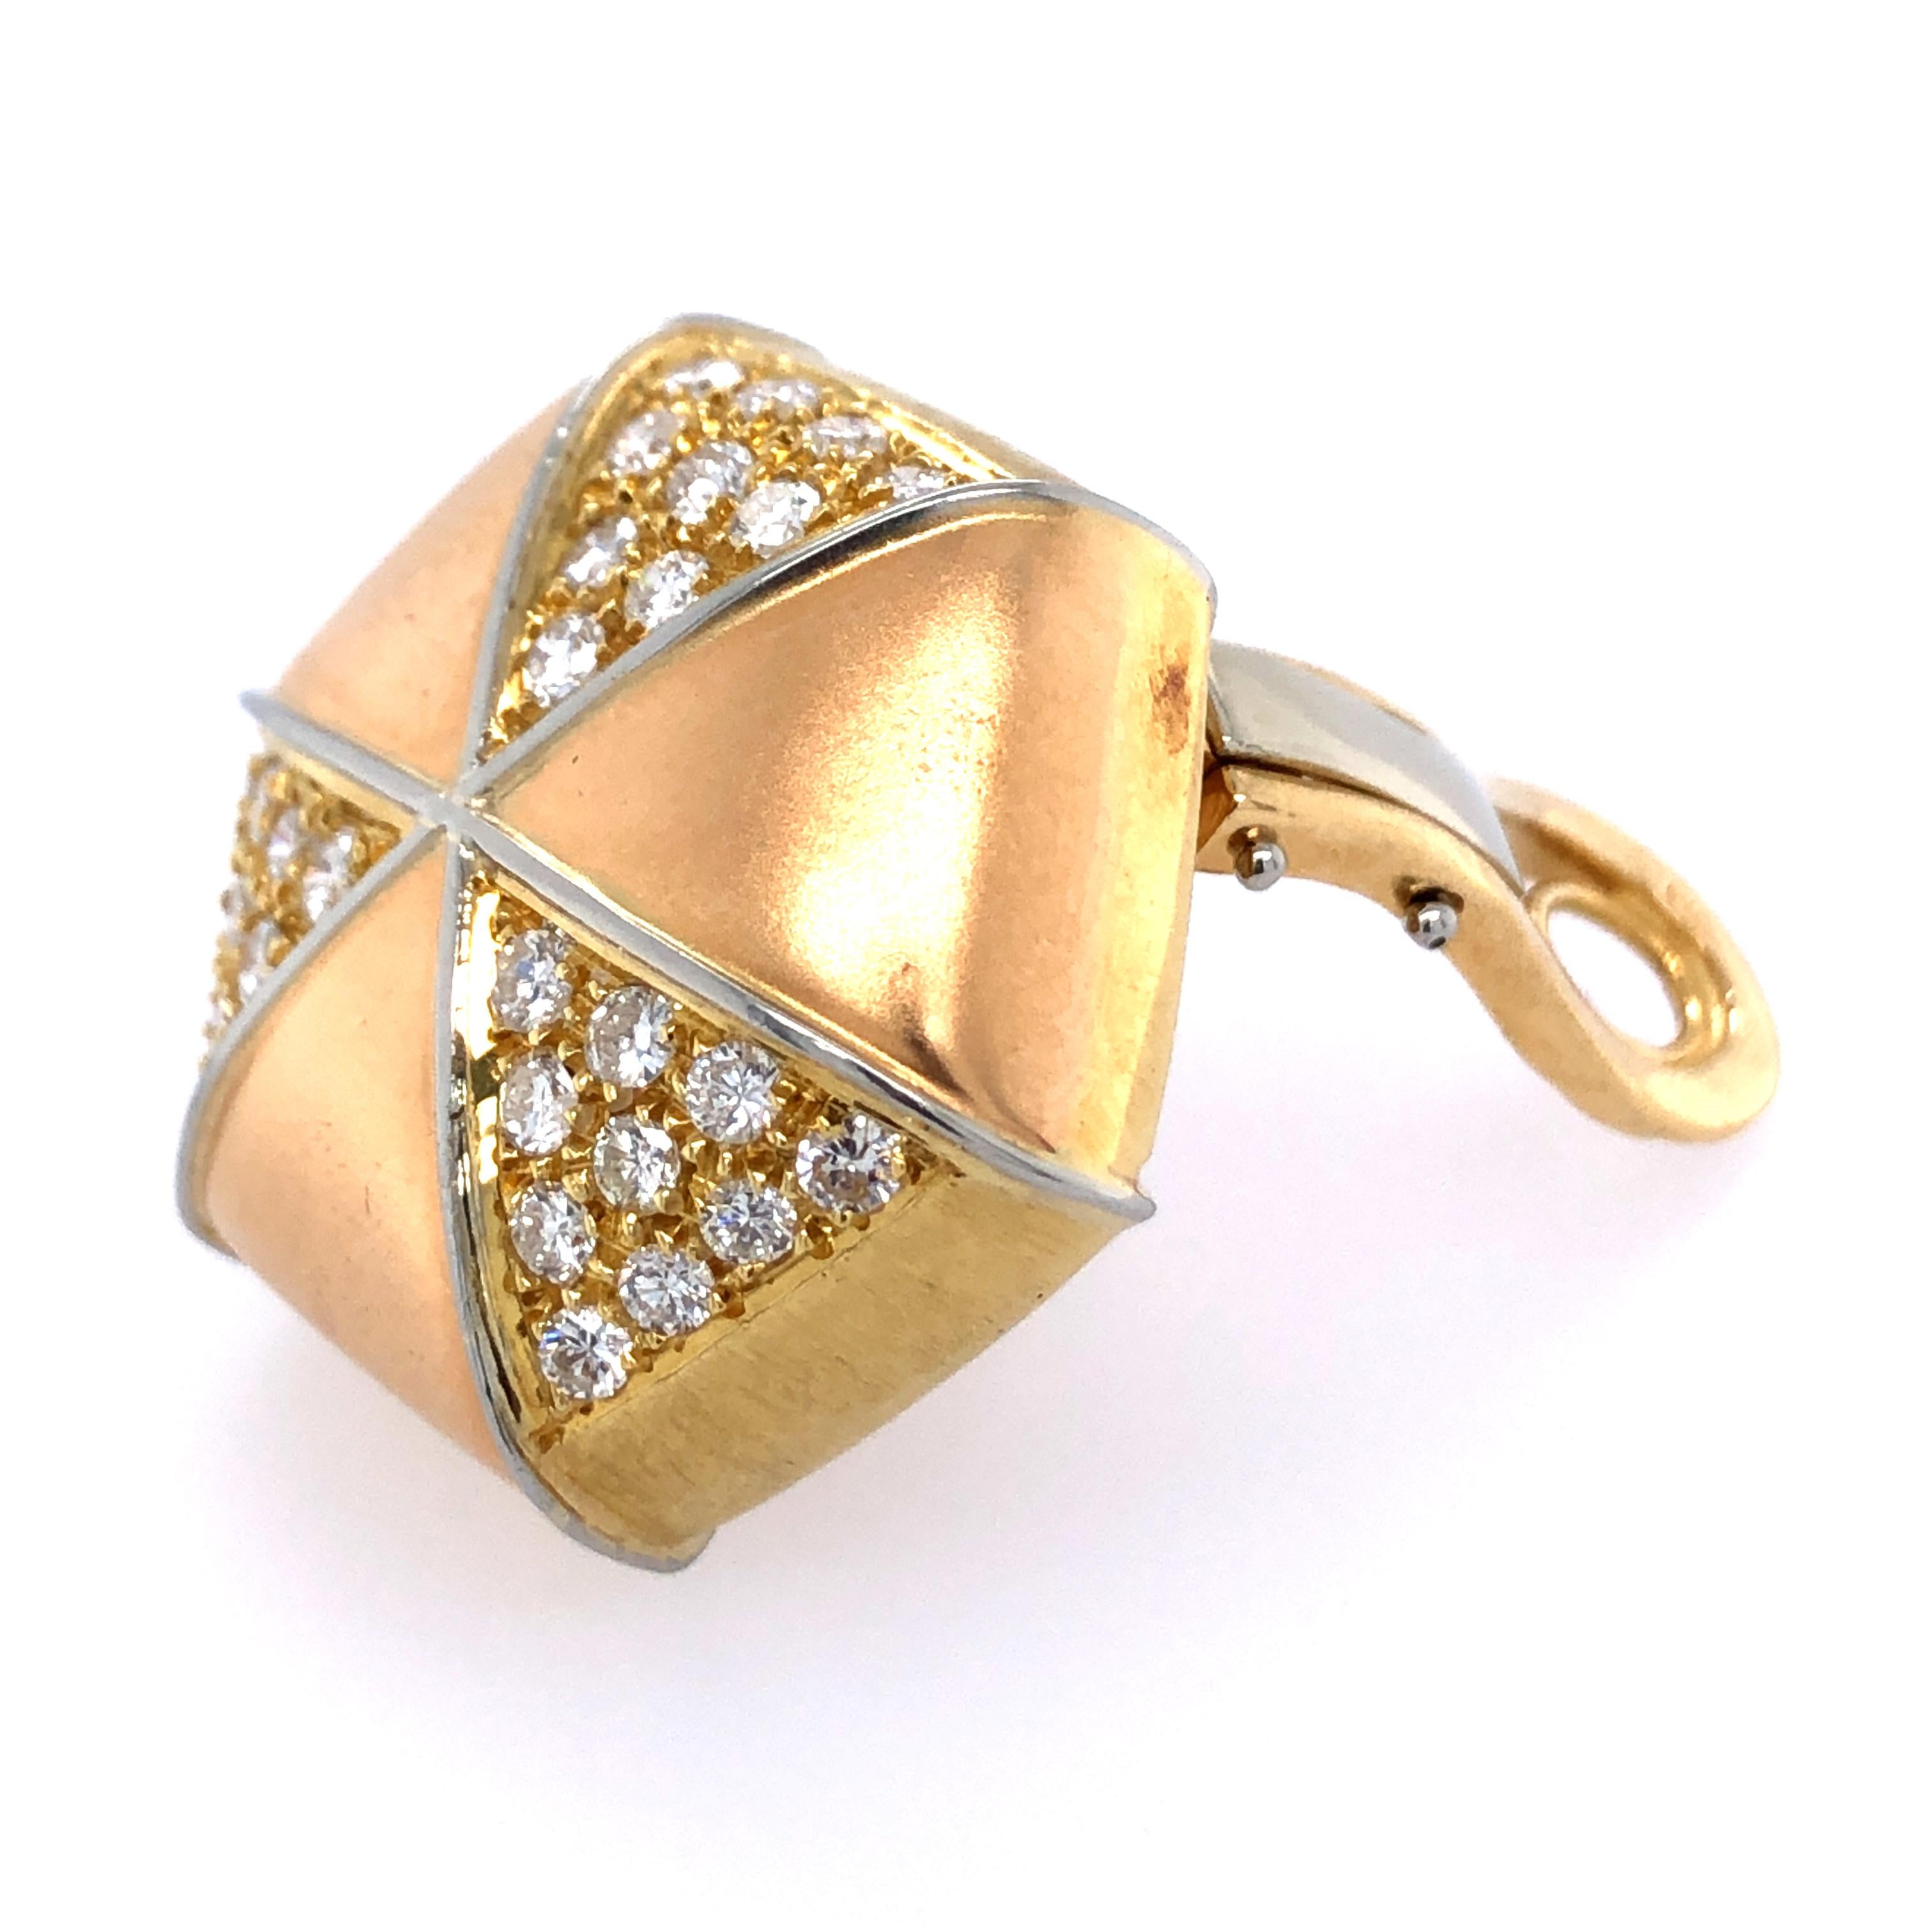 Of hexagonal outline, with alternating triangular panels of pink gold and round brilliant-cut diamonds
18k yellow, white, and pink gold
¾ in; Gross weight 25.5g 16.3 dwts 